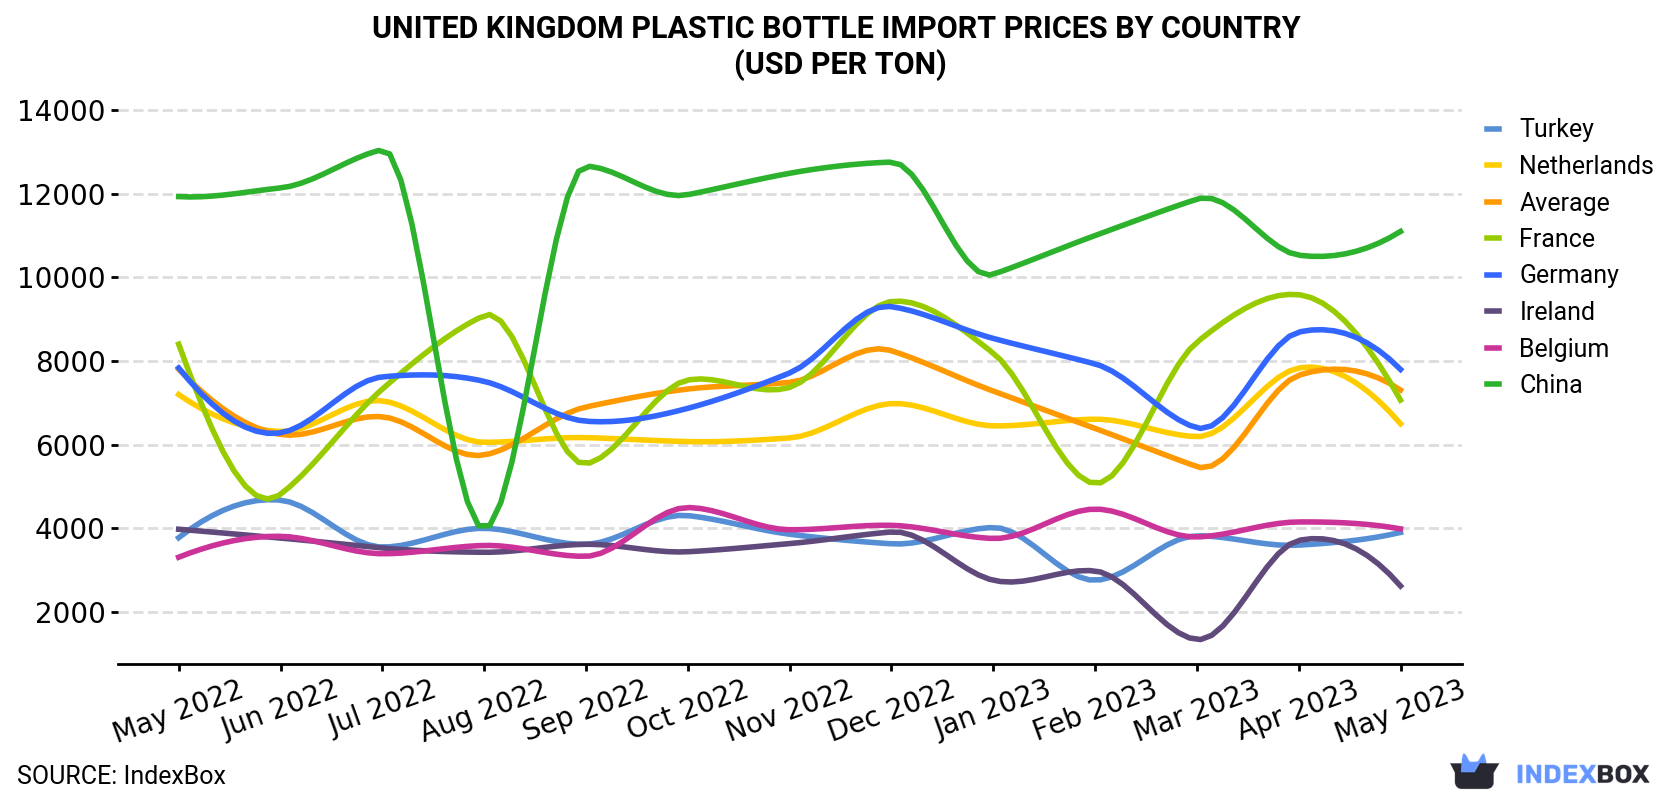 United Kingdom Plastic Bottle Import Prices By Country (USD Per Ton)